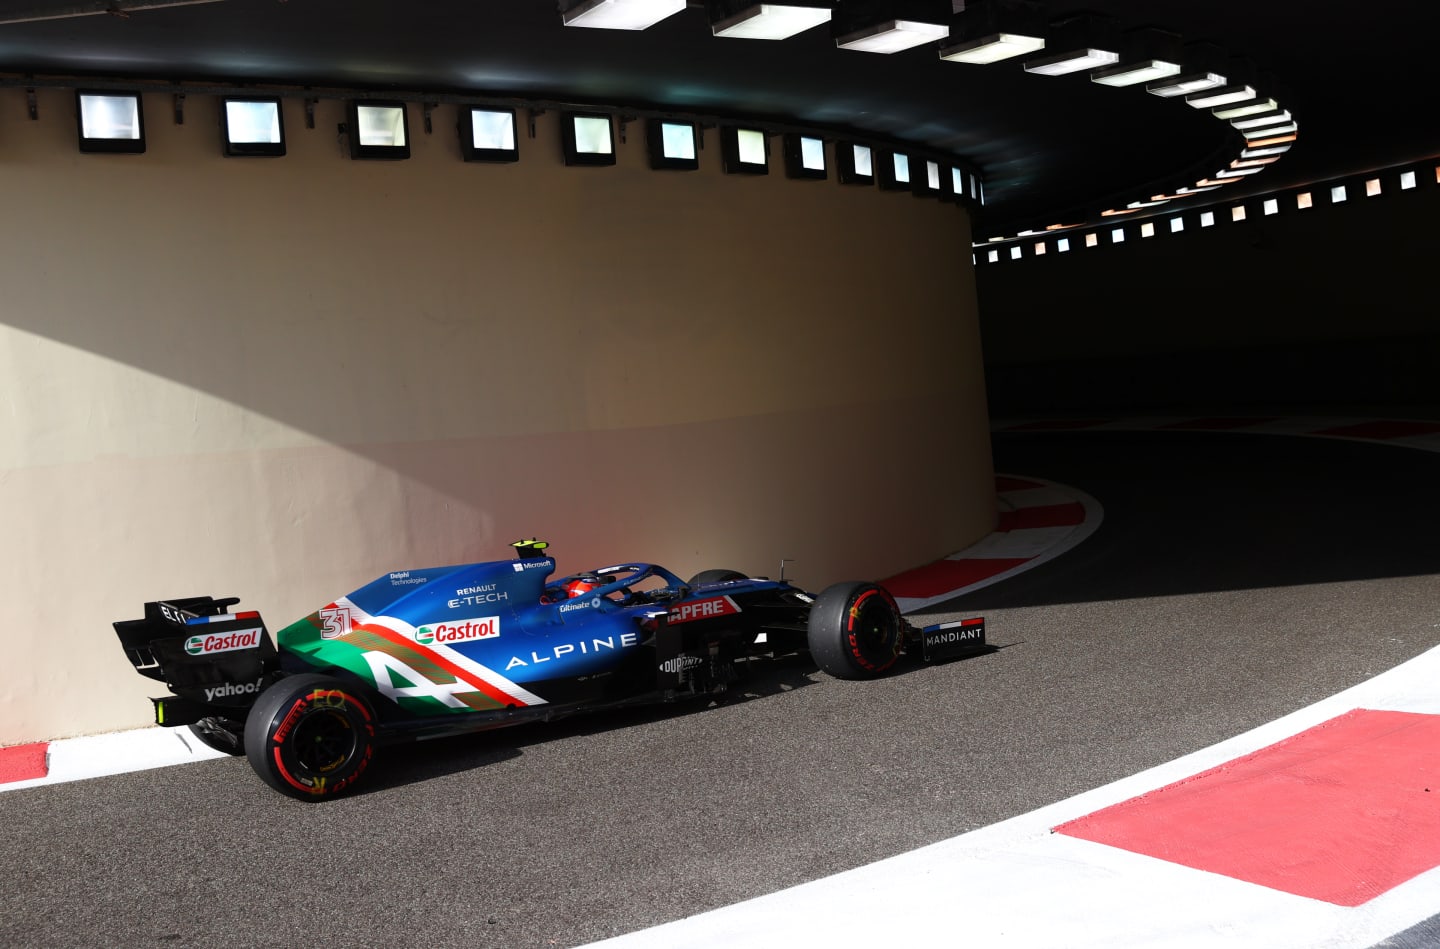 ABU DHABI, UNITED ARAB EMIRATES - DECEMBER 10: Esteban Ocon of France driving the (31) Alpine A521 Renault during practice ahead of the F1 Grand Prix of Abu Dhabi at Yas Marina Circuit on December 10, 2021 in Abu Dhabi, United Arab Emirates. (Photo by Clive Rose/Getty Images)